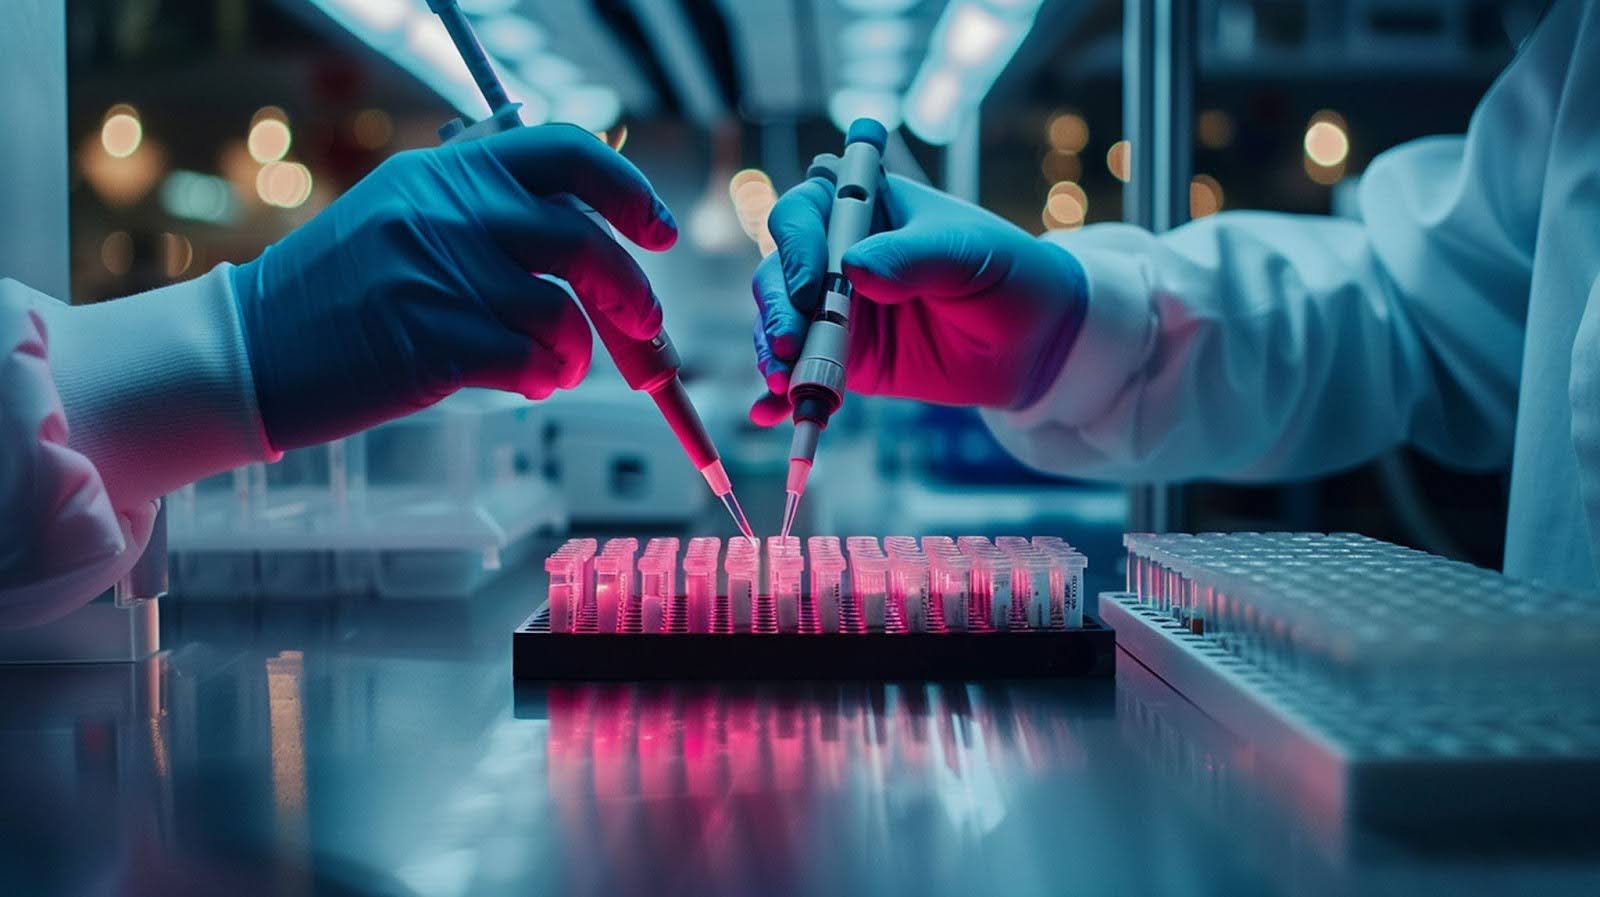 Two oncology researchers pipe samples onto a platform in 'obscurity' while they pour bright pink solutions down the side.